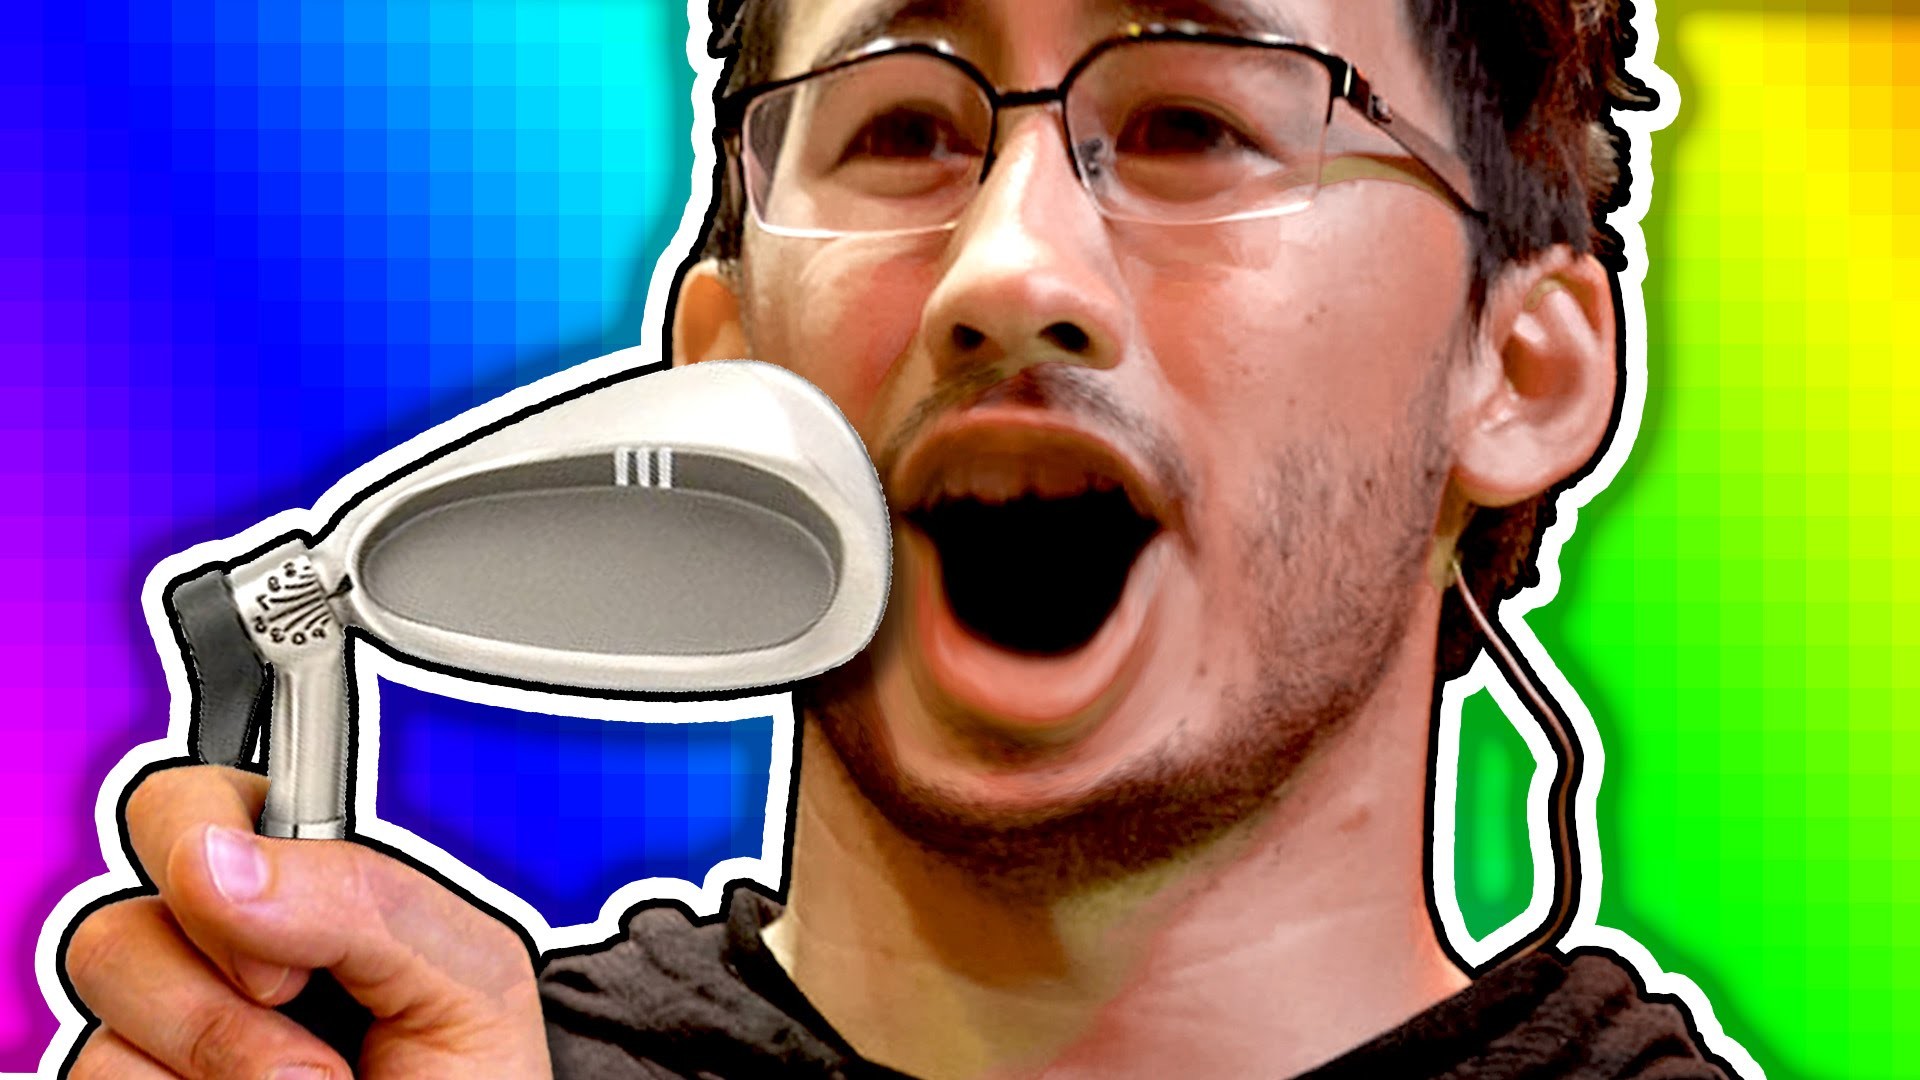 MARKS AMAZING VOICE Golf with Friends ft. Markiplier JackSepticEye – YouTube